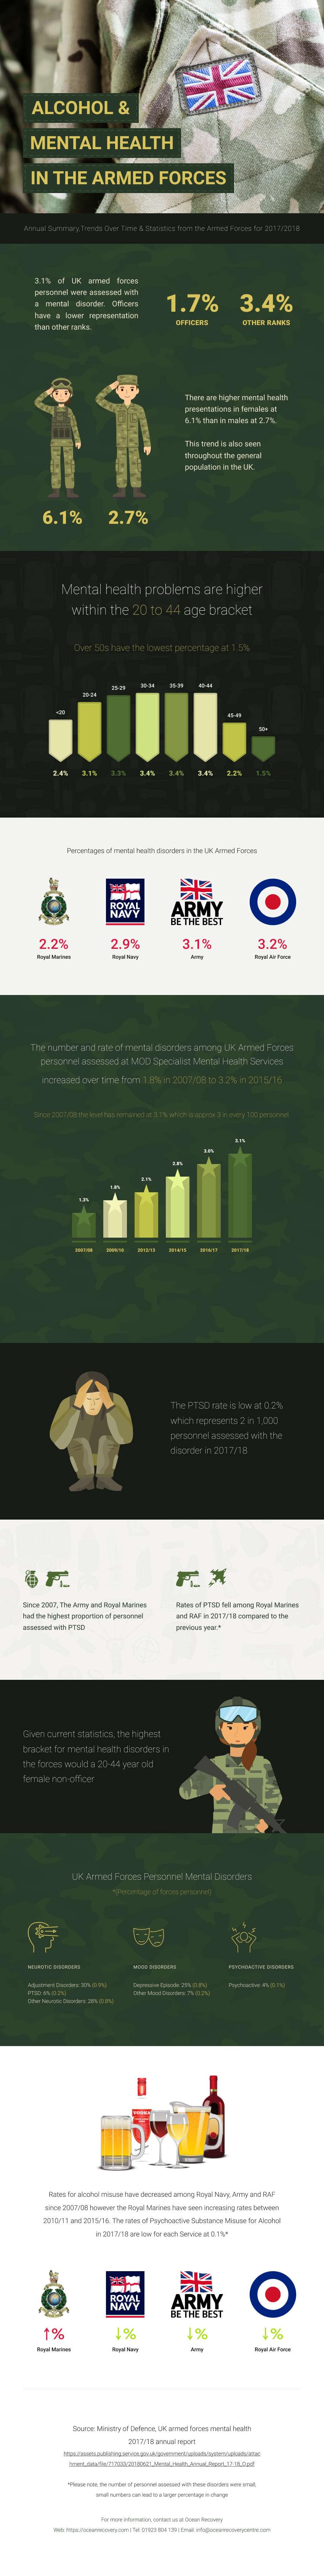 mental health and alcohol in the uk armed forces infographic